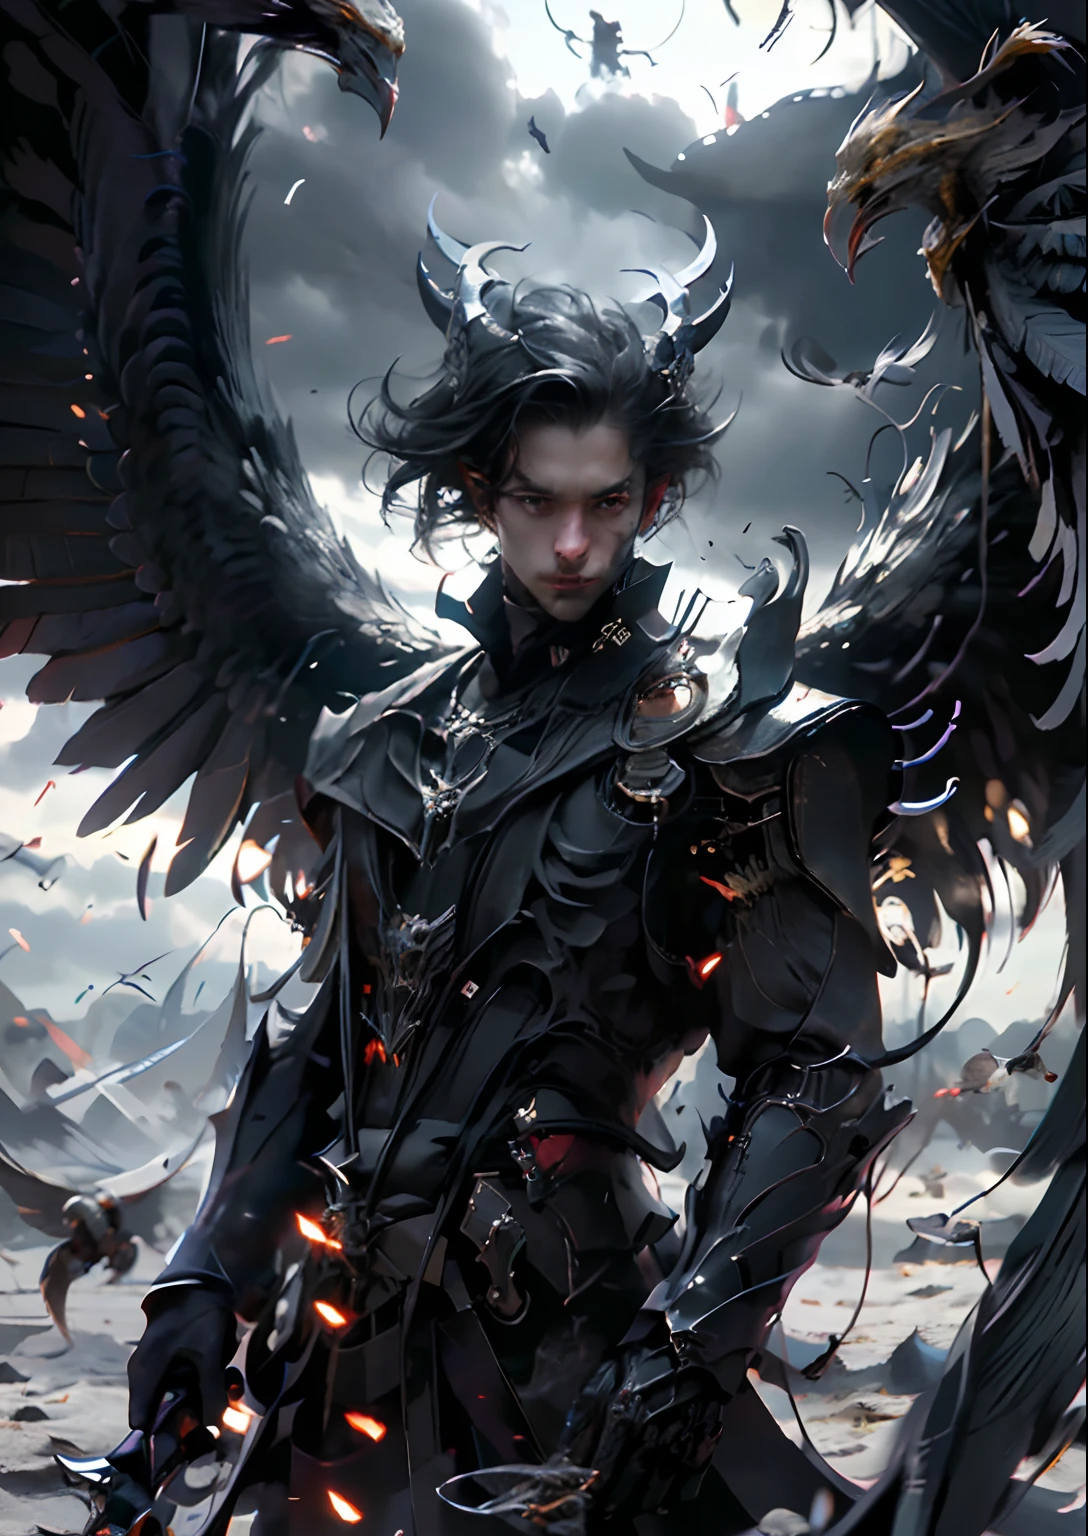 Year's on_Daemon,Solo,Looking_at_peeping at the viewer,black_Hair,1boy,Closed_Mouth,standing,Male_Focus,Wings,Horns,Armor,Bird,Shoulder_Armor,Pedras preciosas,black_Wings,
Cinematic lighting,Strong contrast,High level of detail,Best quality,Masterpiece,White background,Perfect face，Stout horns